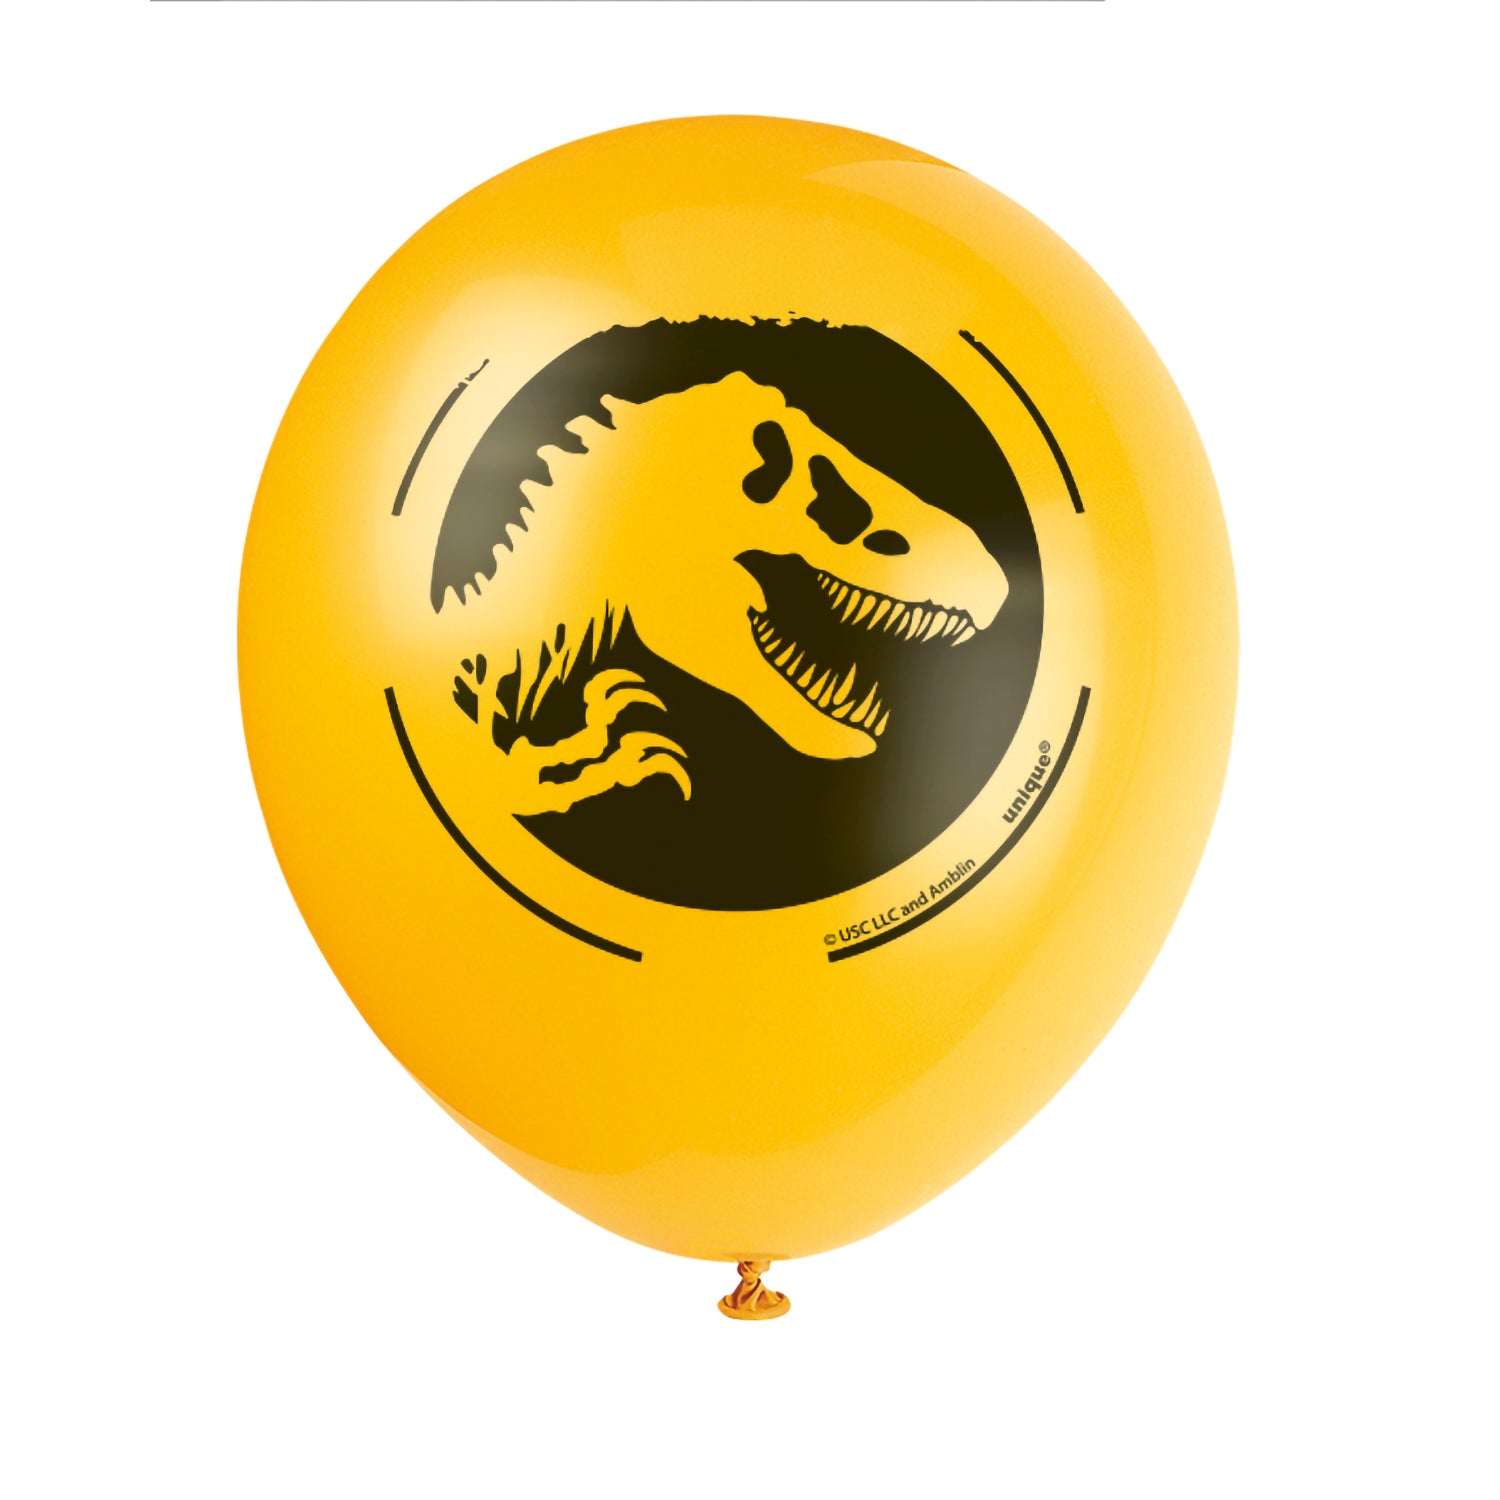 Jurassic World Dominion Latex Party Balloons [8 per Pack]